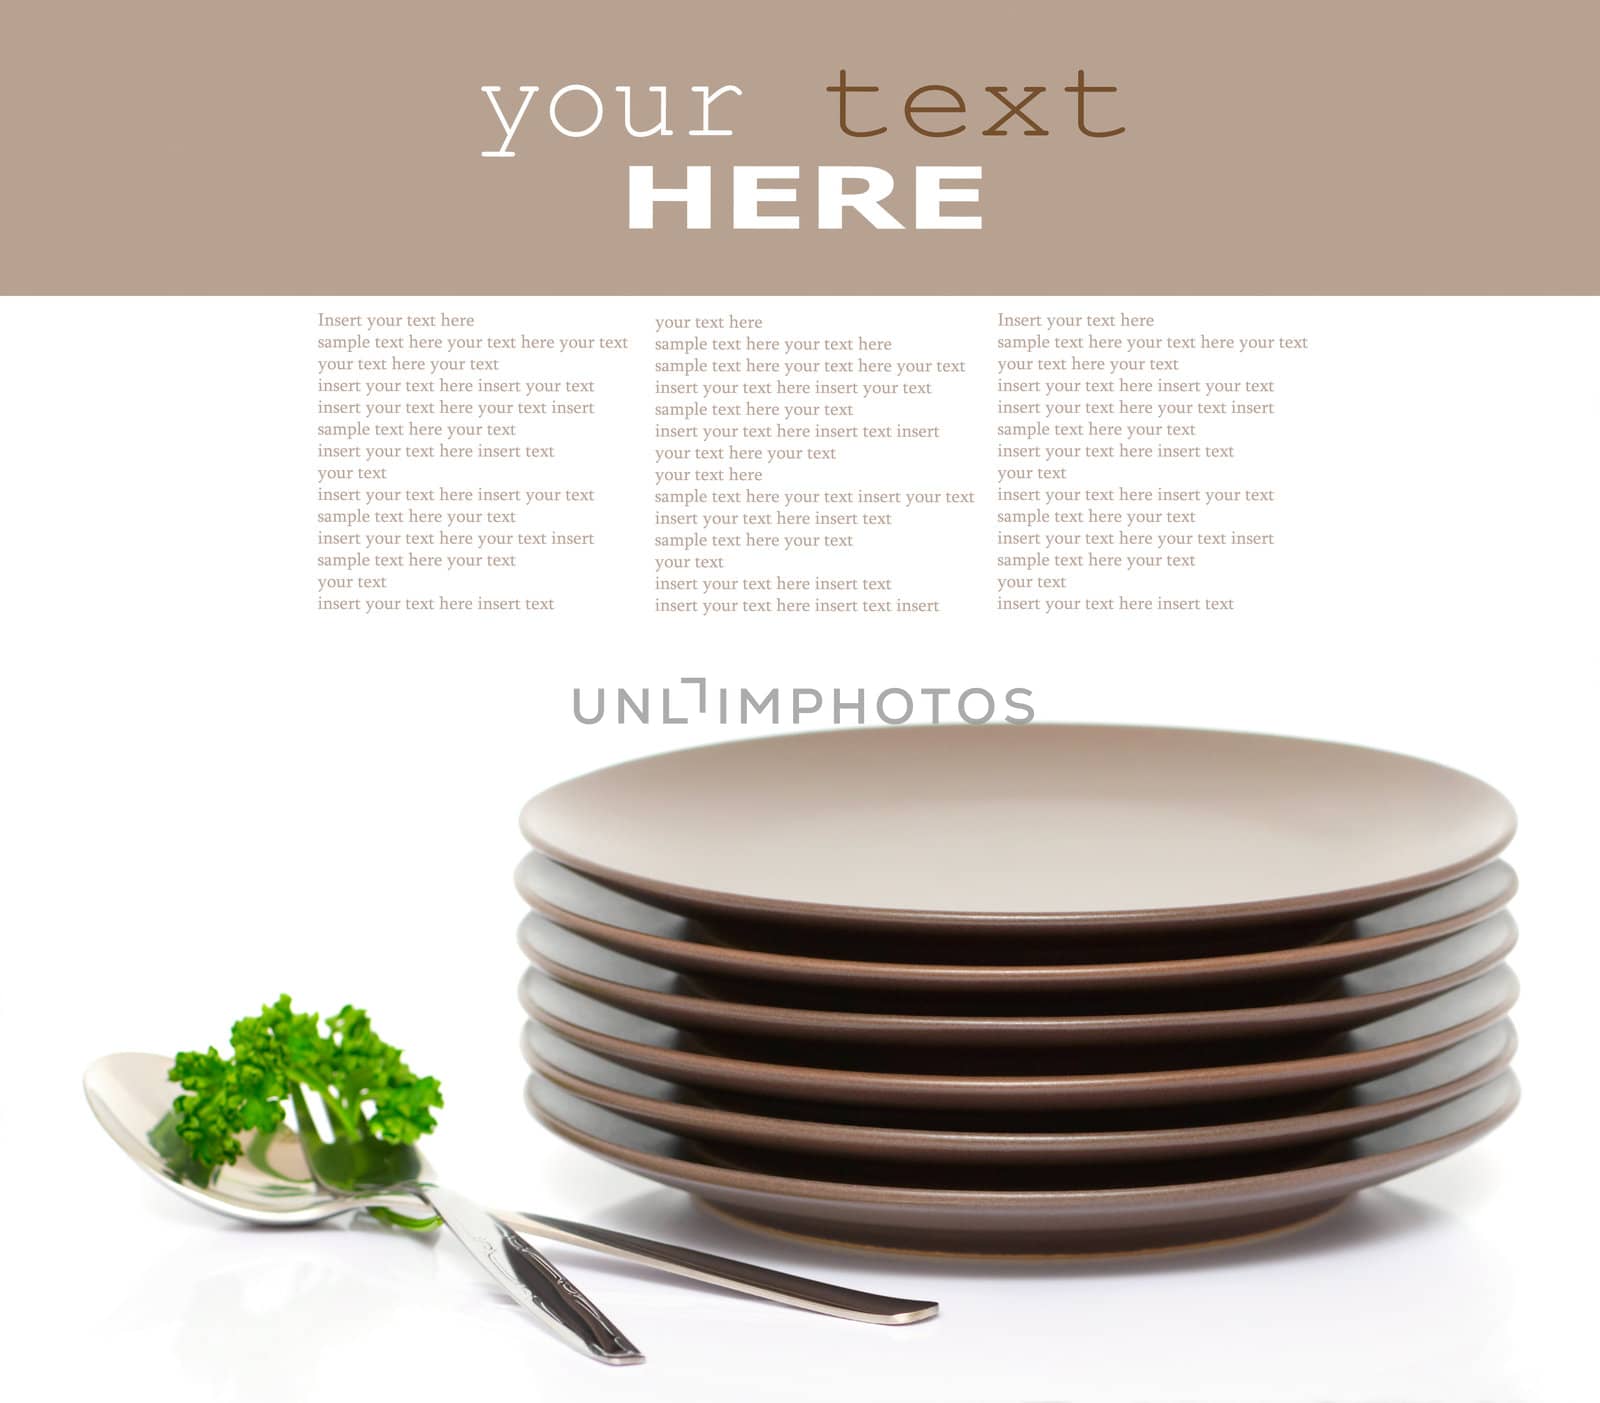 Stack of brown round plates with fork, spoon and parsley (with sample text)
